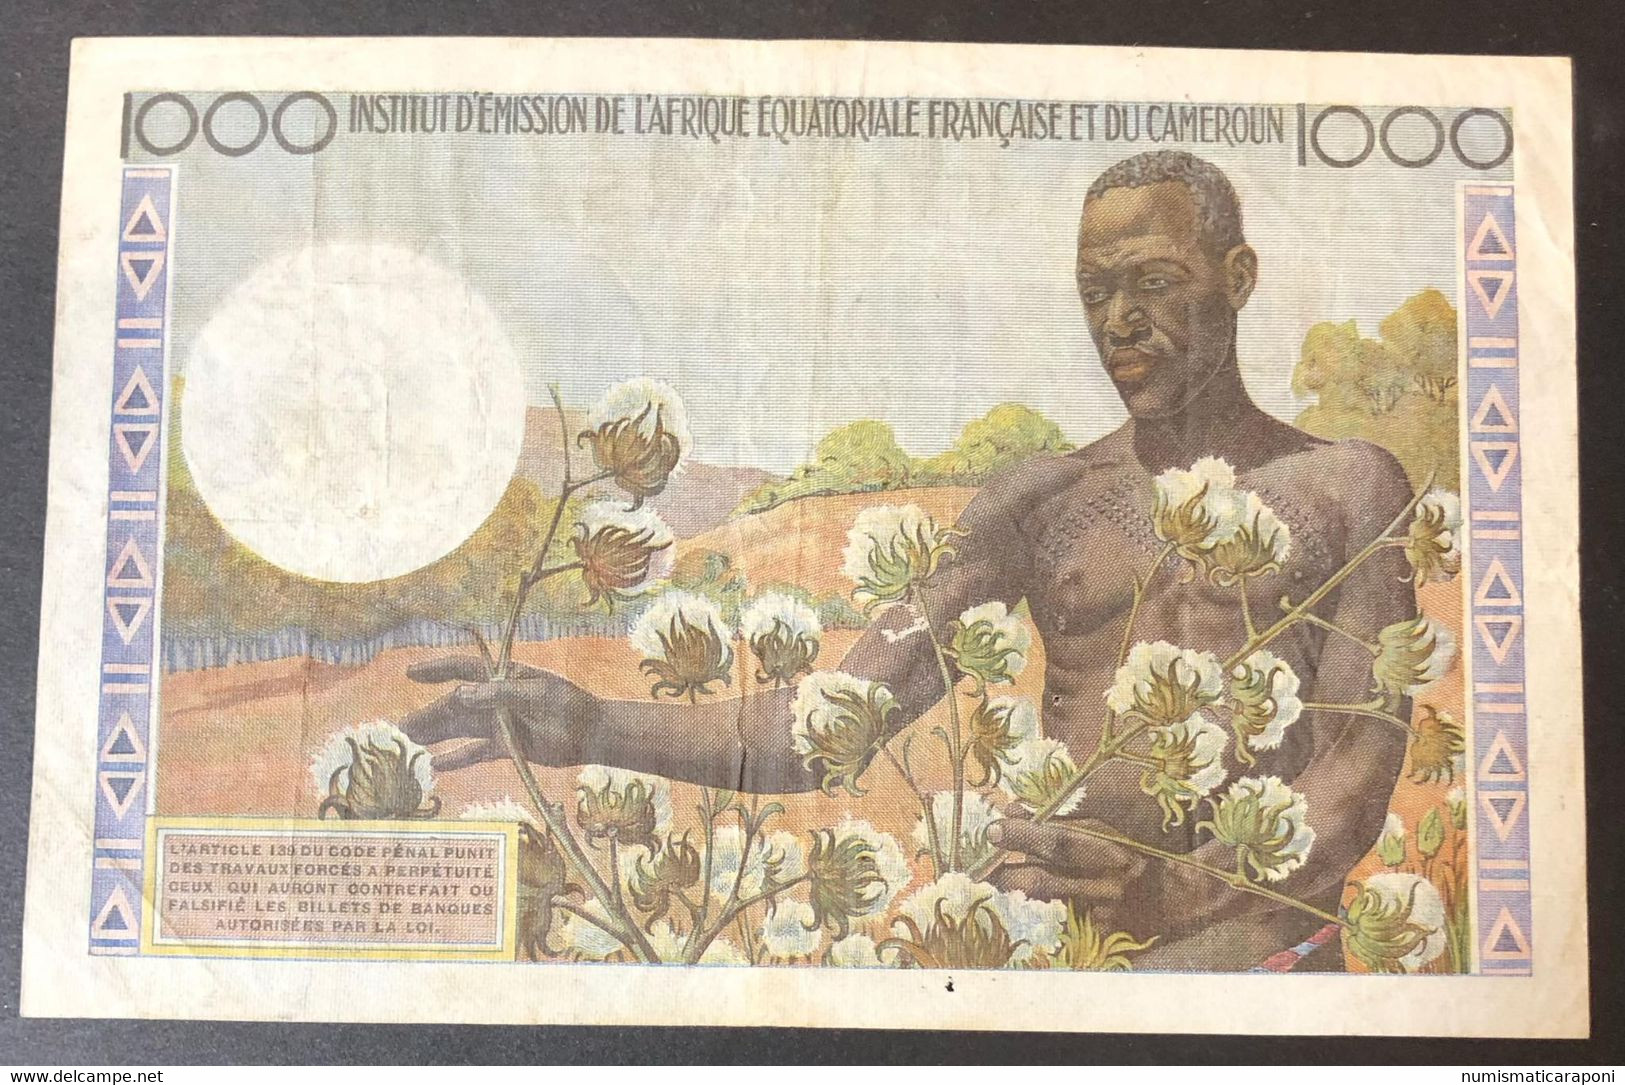 Cameroun  French Equatorial Africa Cameroon 1000 Francs 1957 Pick#34 Very Fine LOTTO 1814 - Cameroun